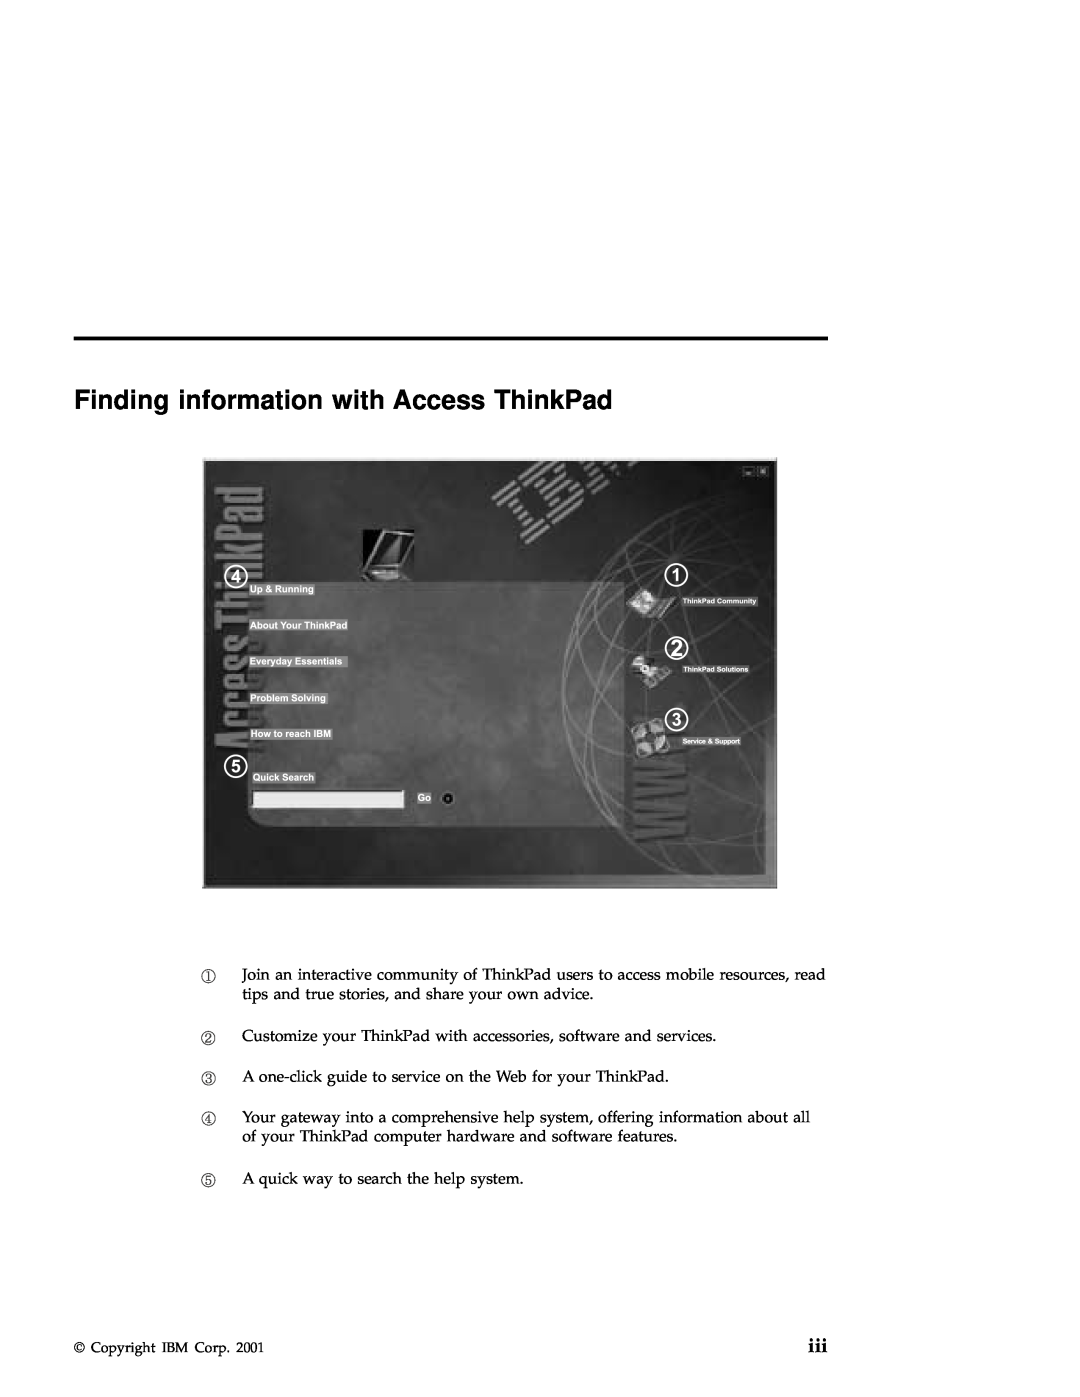 IBM A22 manual Finding information with Access ThinkPad 